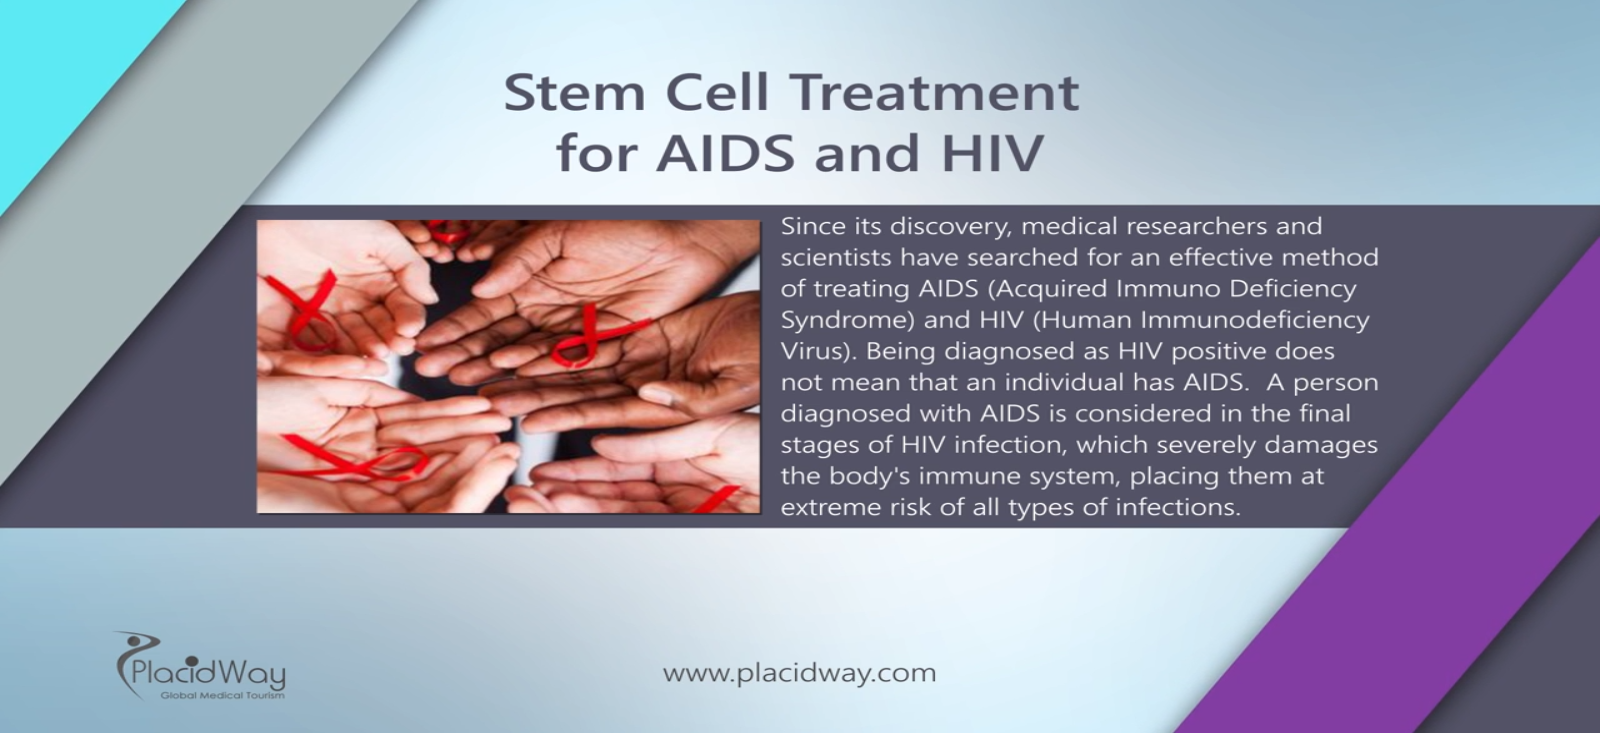 Stem Cell Treatment for AIDS and HIV Fighting HIV With Stem Cells